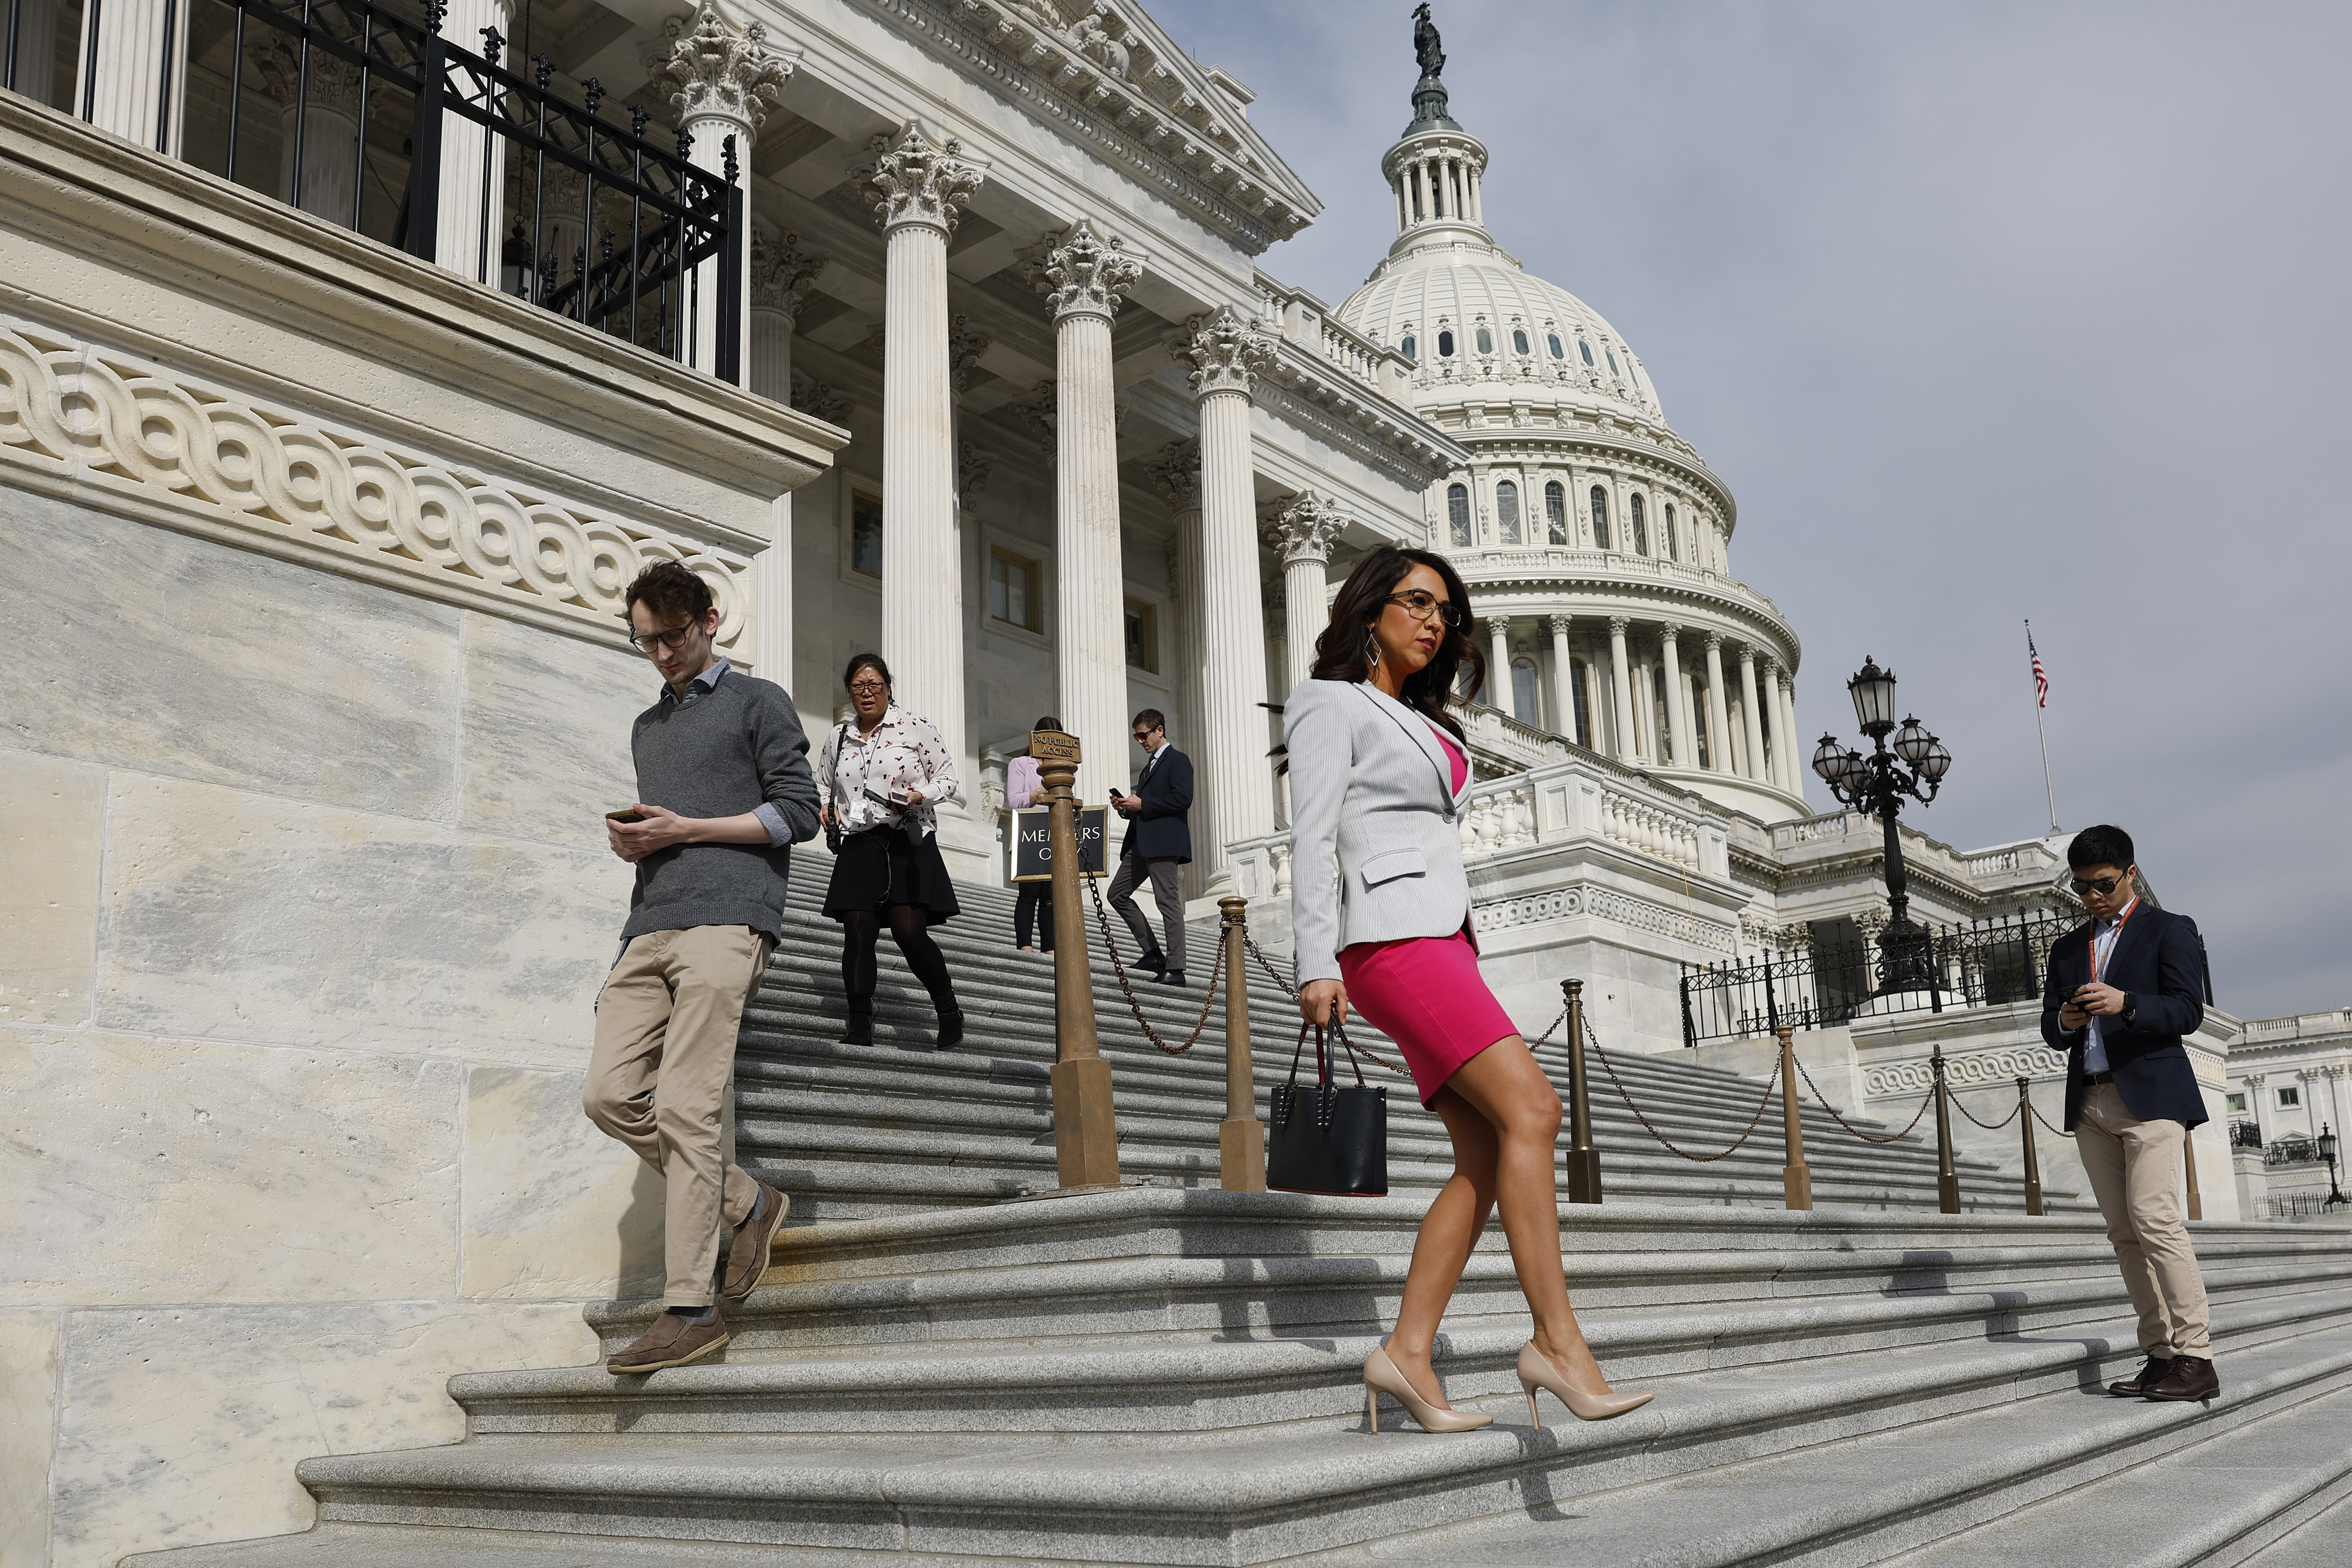 Individuals descend the Capitol steps, one in focus with a pink skirt and white blazer